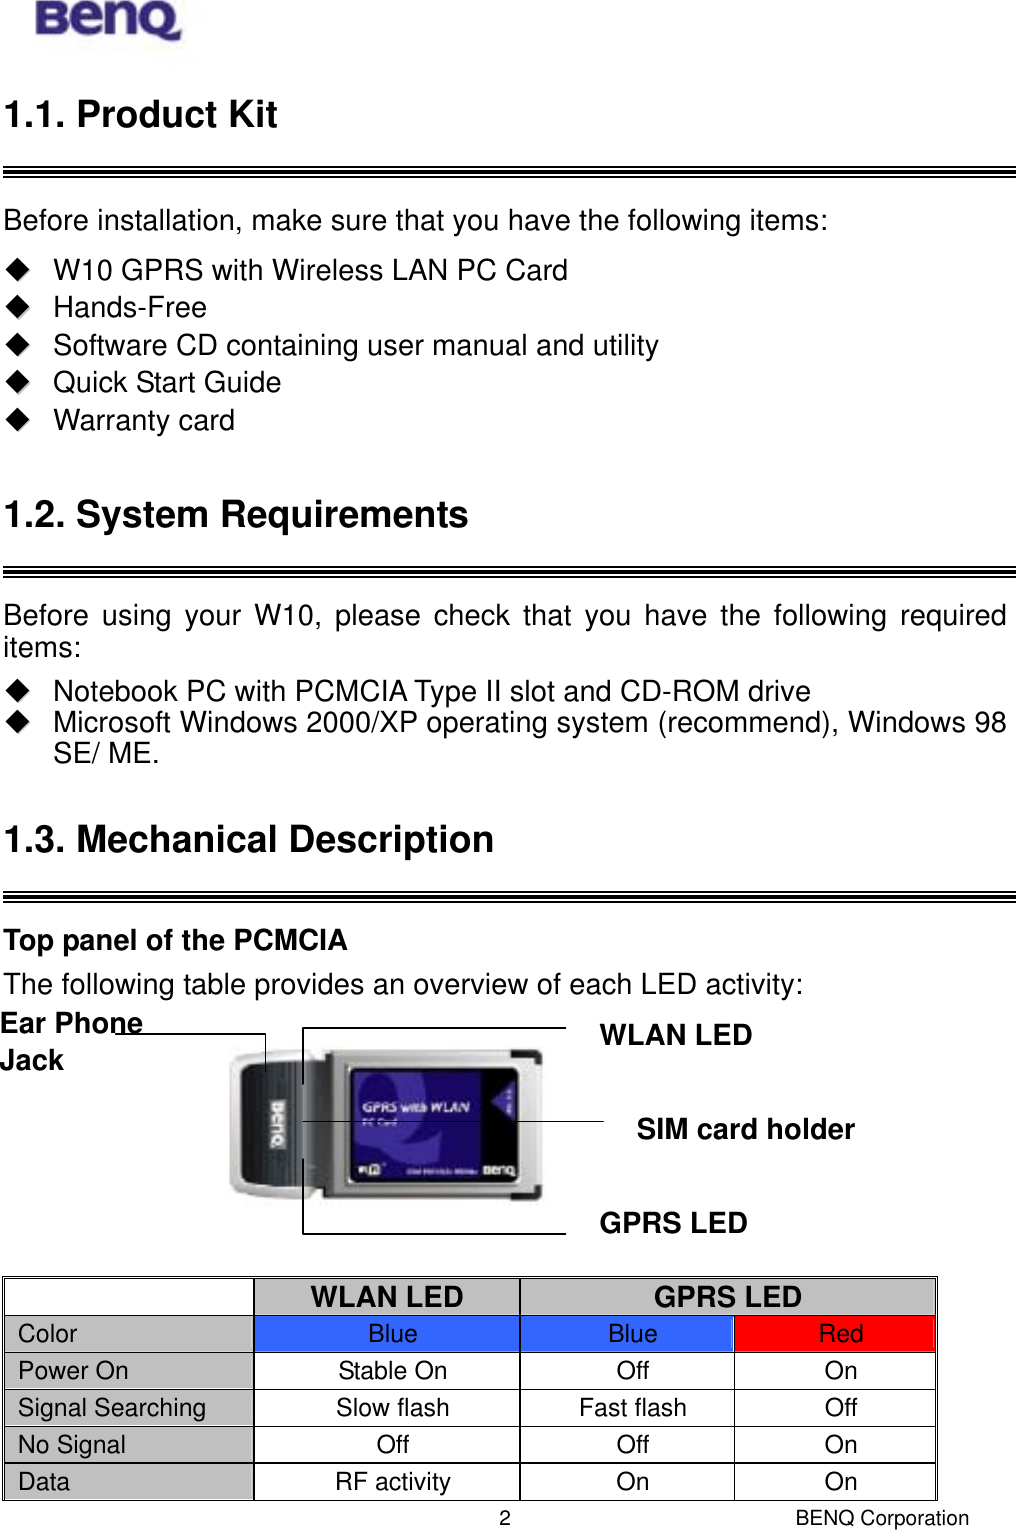  BENQ Corporation 21.1. Product Kit  Before installation, make sure that you have the following items:   W10 GPRS with Wireless LAN PC Card   Hands-Free   Software CD containing user manual and utility   Quick Start Guide   Warranty card  1.2. System Requirements  Before using your W10, please check that you have the following required items:   Notebook PC with PCMCIA Type II slot and CD-ROM drive   Microsoft Windows 2000/XP operating system (recommend), Windows 98 SE/ ME.  1.3. Mechanical Description  Top panel of the PCMCIA The following table provides an overview of each LED activity:       WLAN LED  GPRS LED Color  Blue  Blue  Red Power On  Stable On   Off   On Signal Searching  Slow flash  Fast flash  Off No Signal  Off Off On Data  RF activity  On  On WLAN LED GPRS LED SIM card holder Ear Phone Jack 